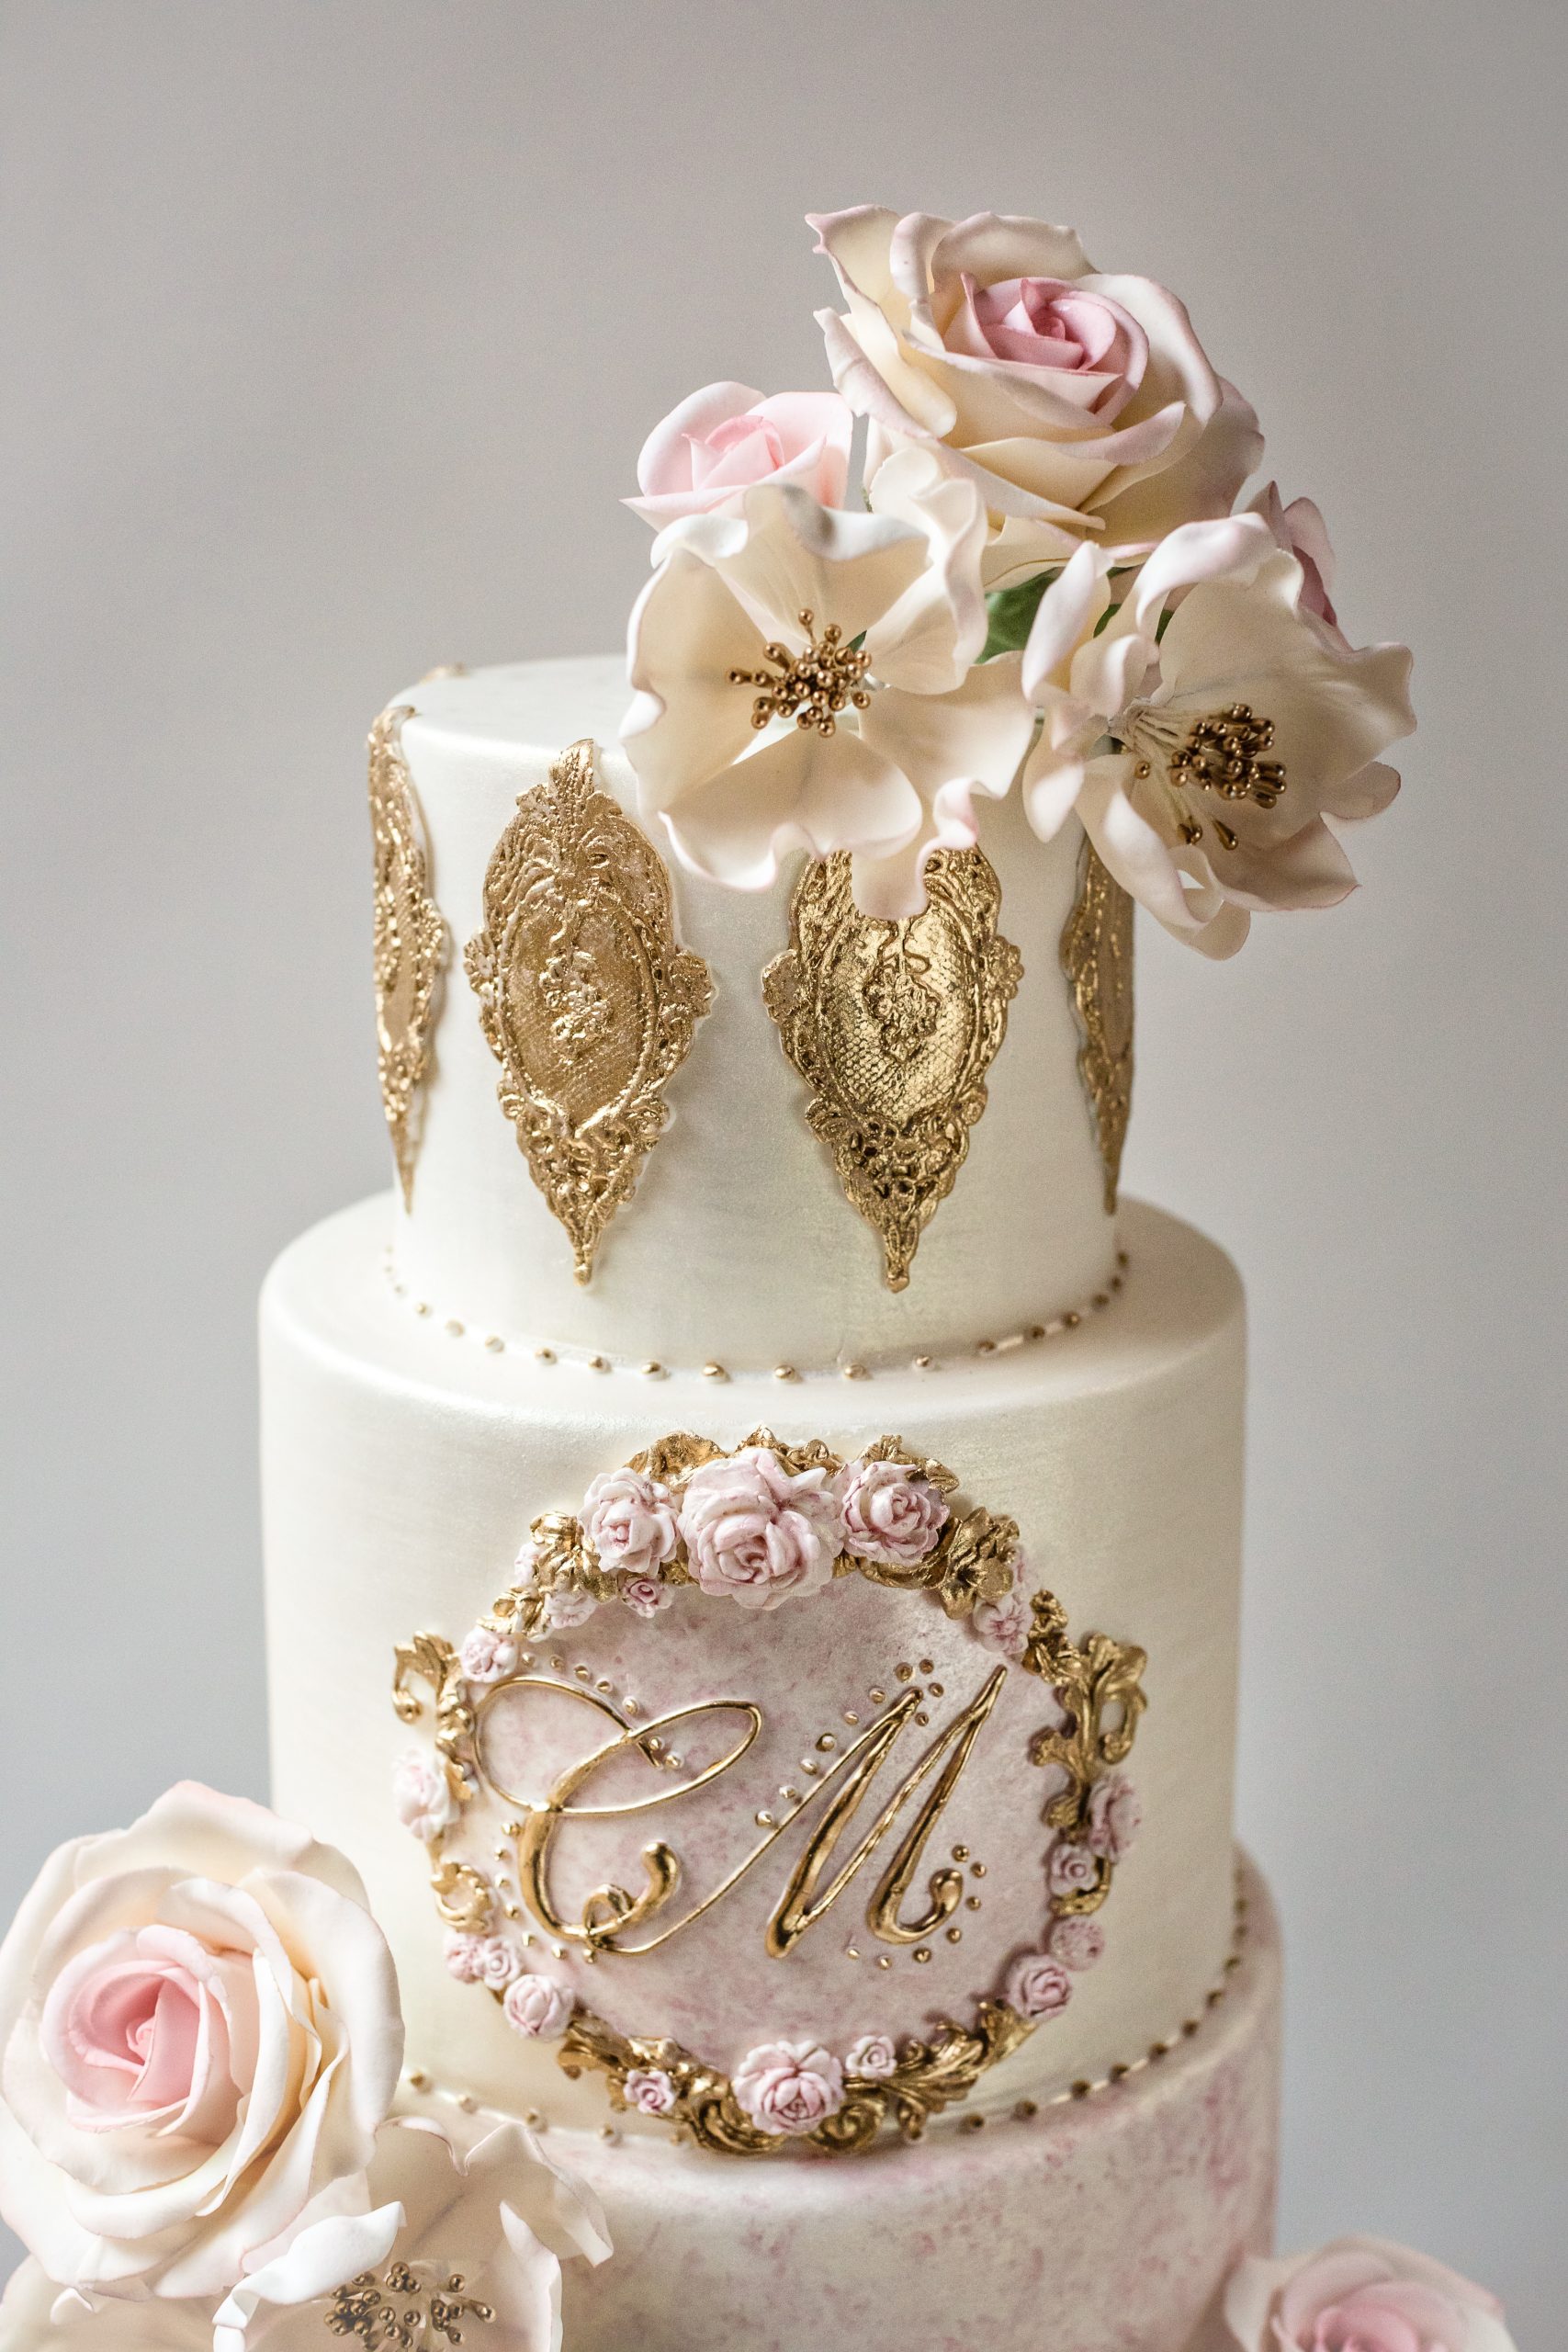 Luxurious Vintage Wedding Cake with custom monogram, gold lace, and sugar flowers. High-End Designer wedding cakes by Ana Parzych, CT, NYC, RI, MA.